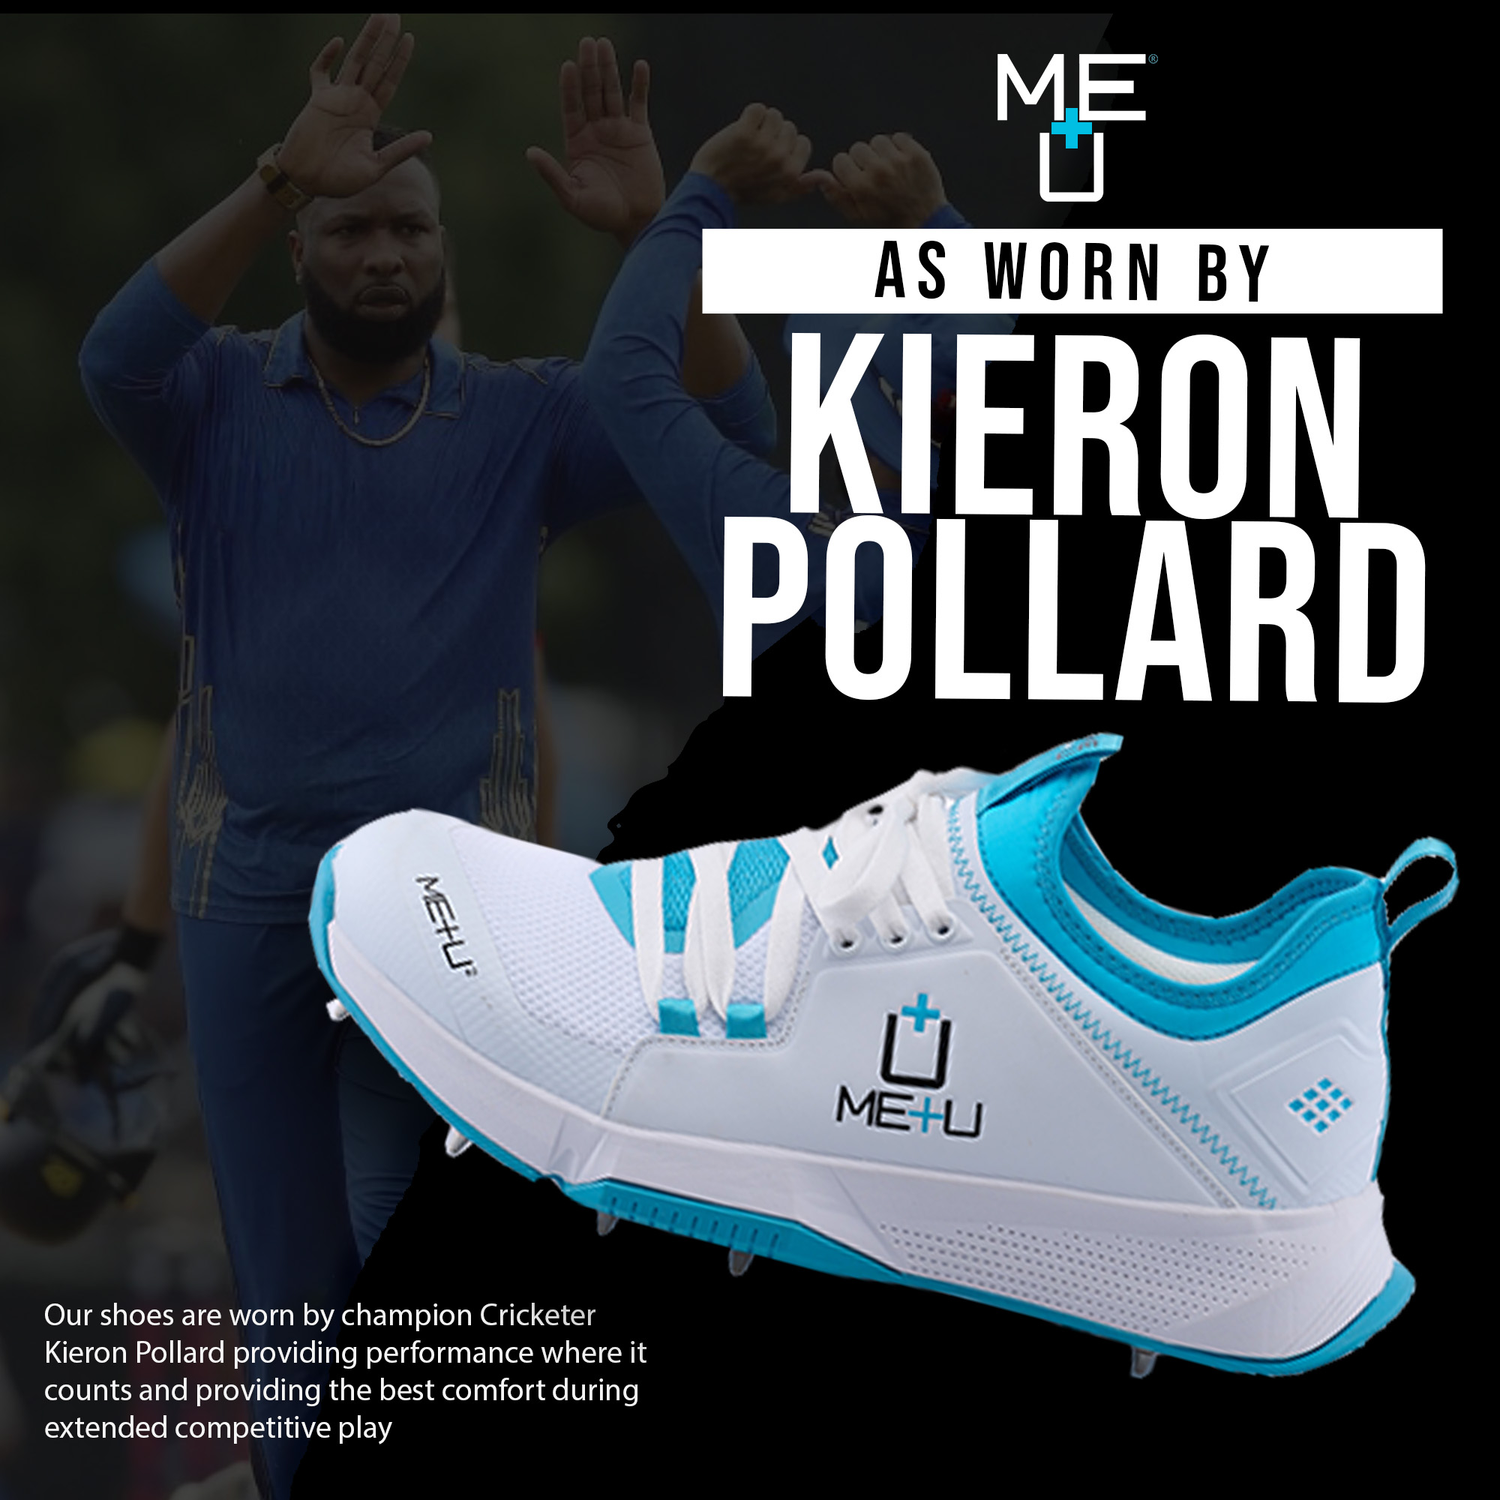 Mens All Rounder Cricket Shoes with blue trim as worn by Kieron Pollard